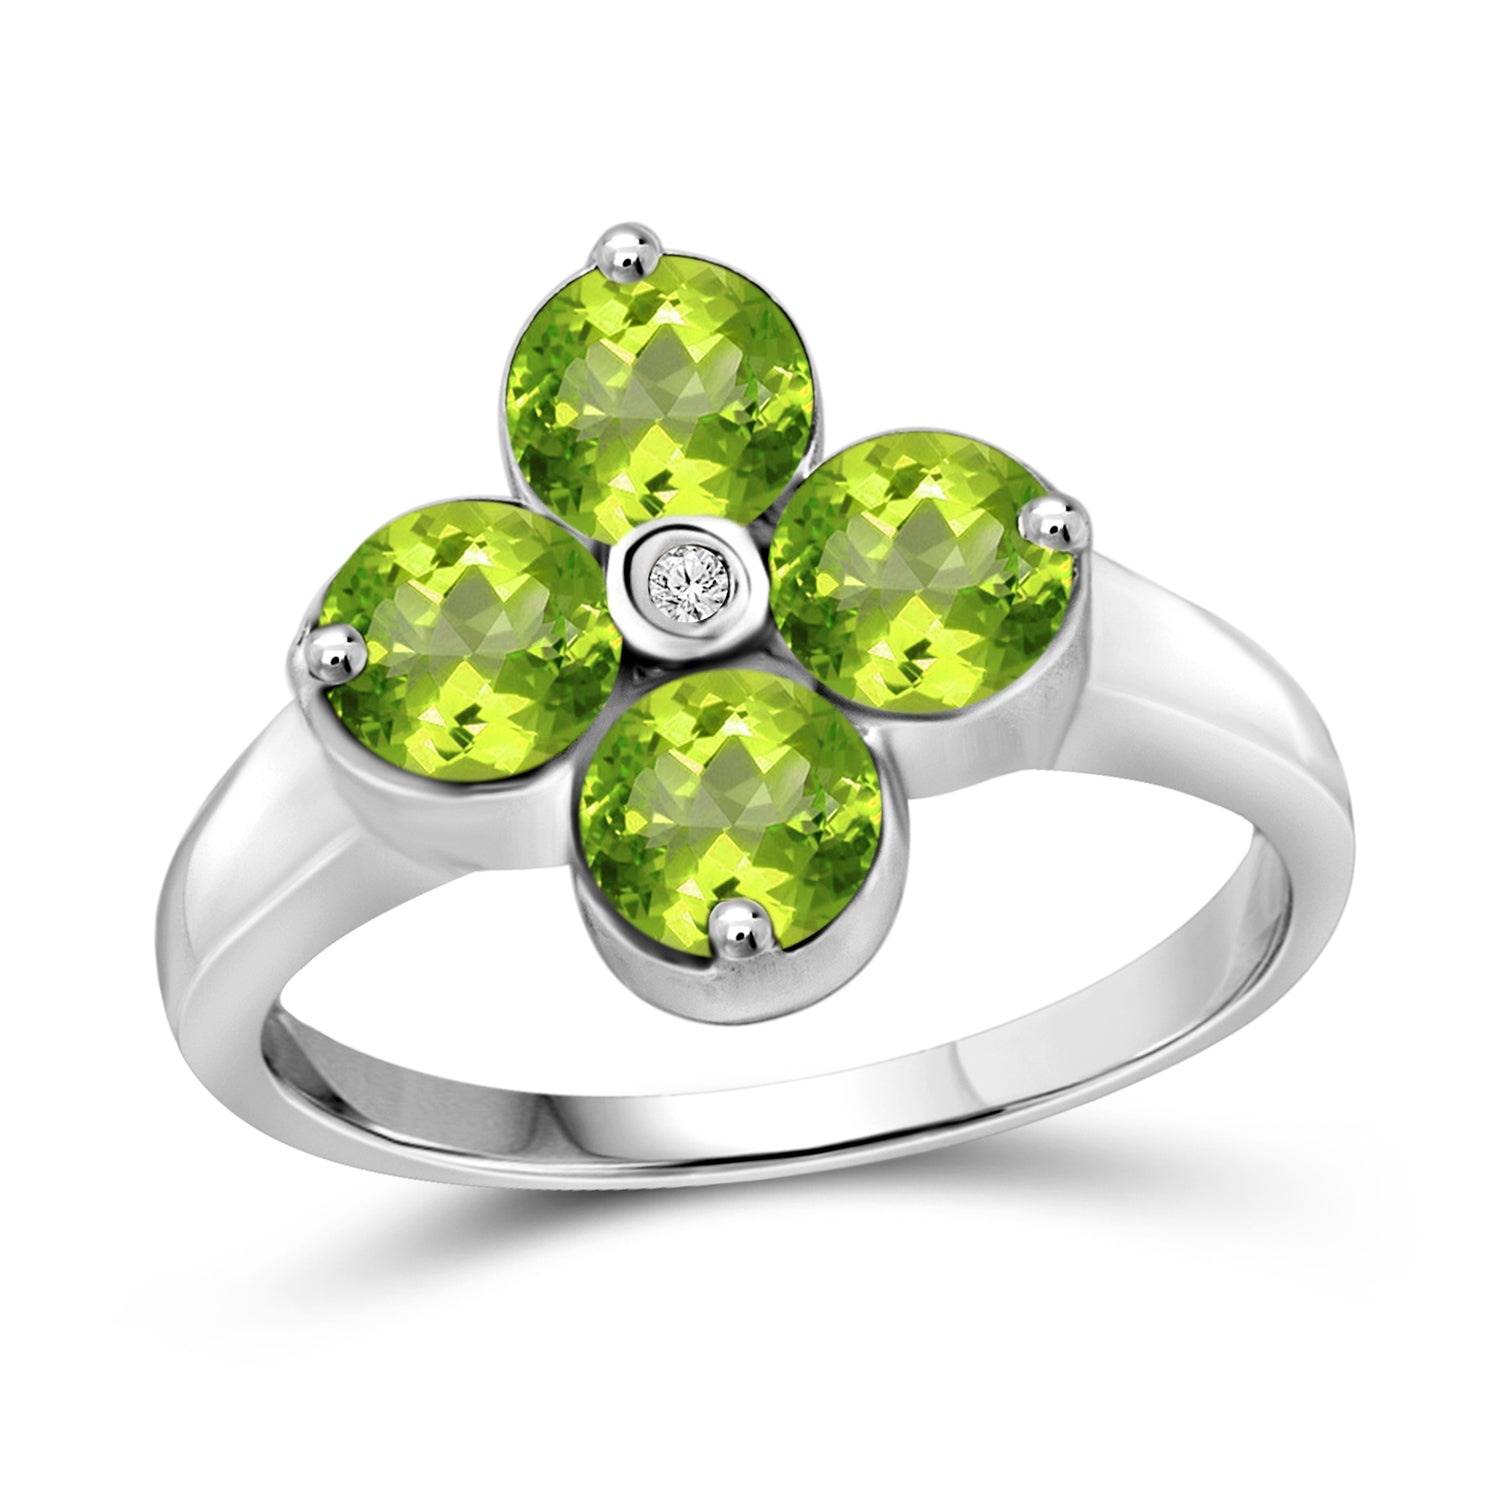 Gemstone & WhIte Diamond Ring in 0.925 Sterling Silver Or 14K Gold-Plated - Assorted Gemstone